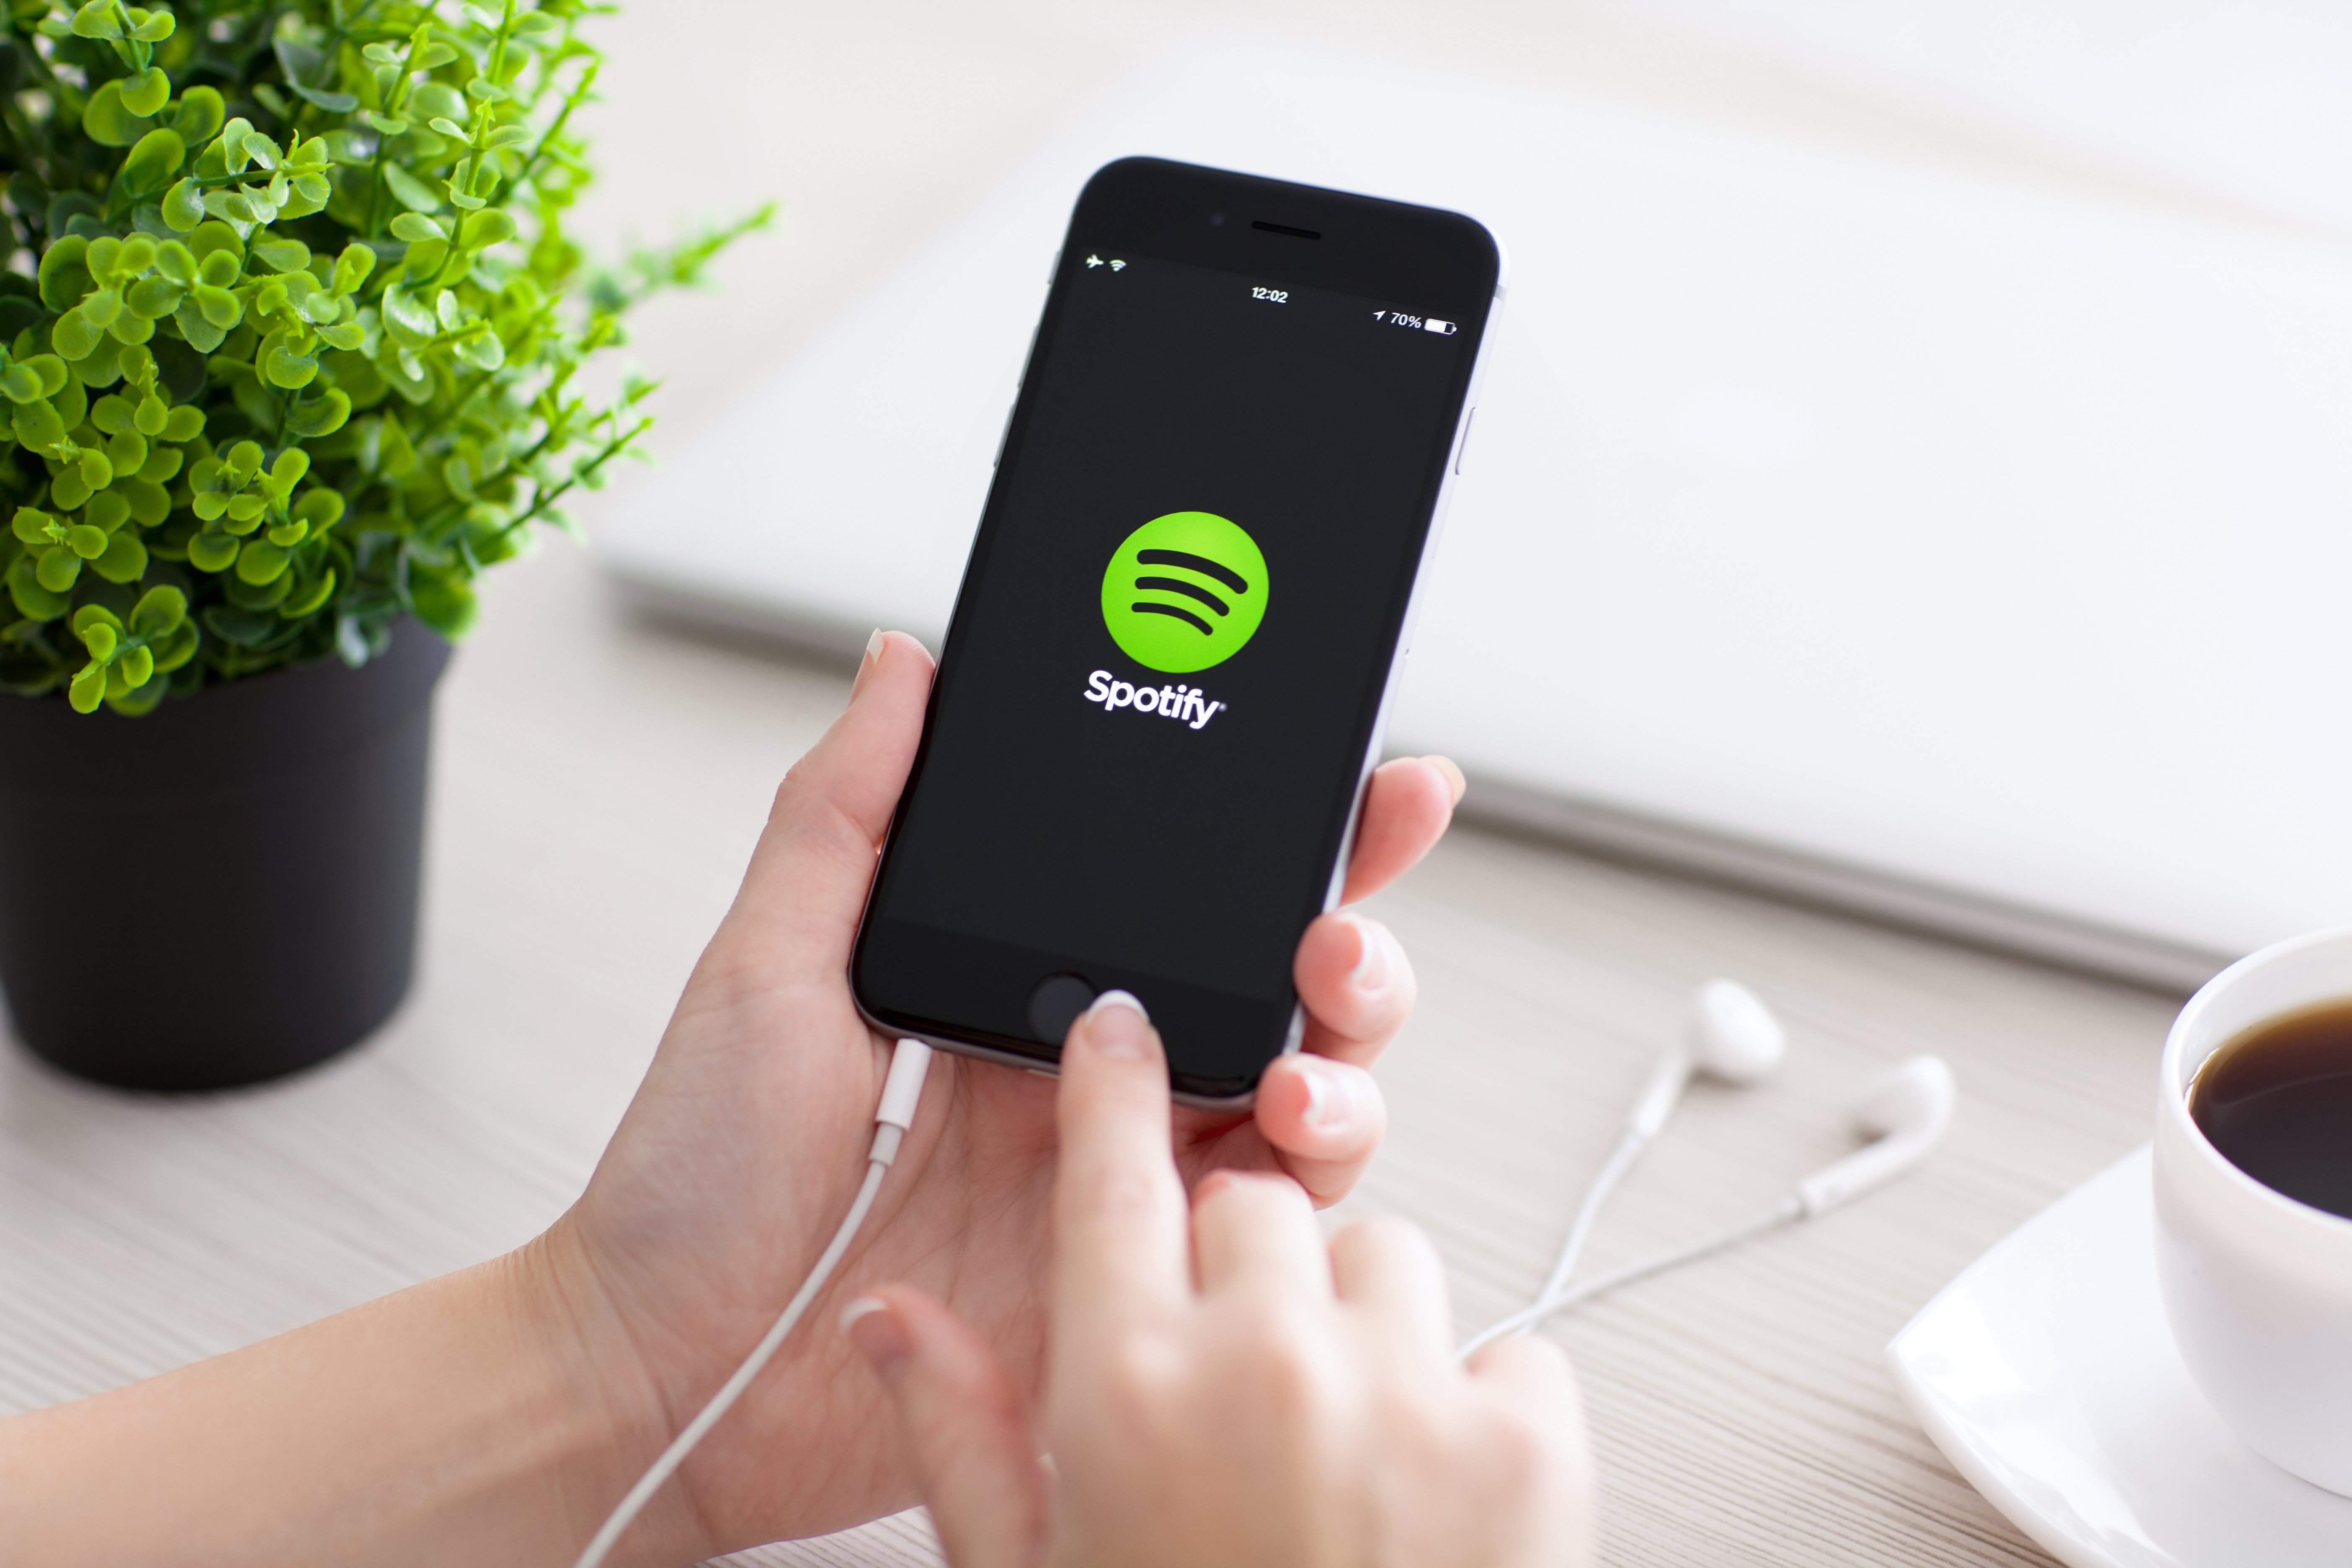 Find out why user are angry about the new Spotify Privacy Policy. Denys Prykhodov / Shutterstock.com